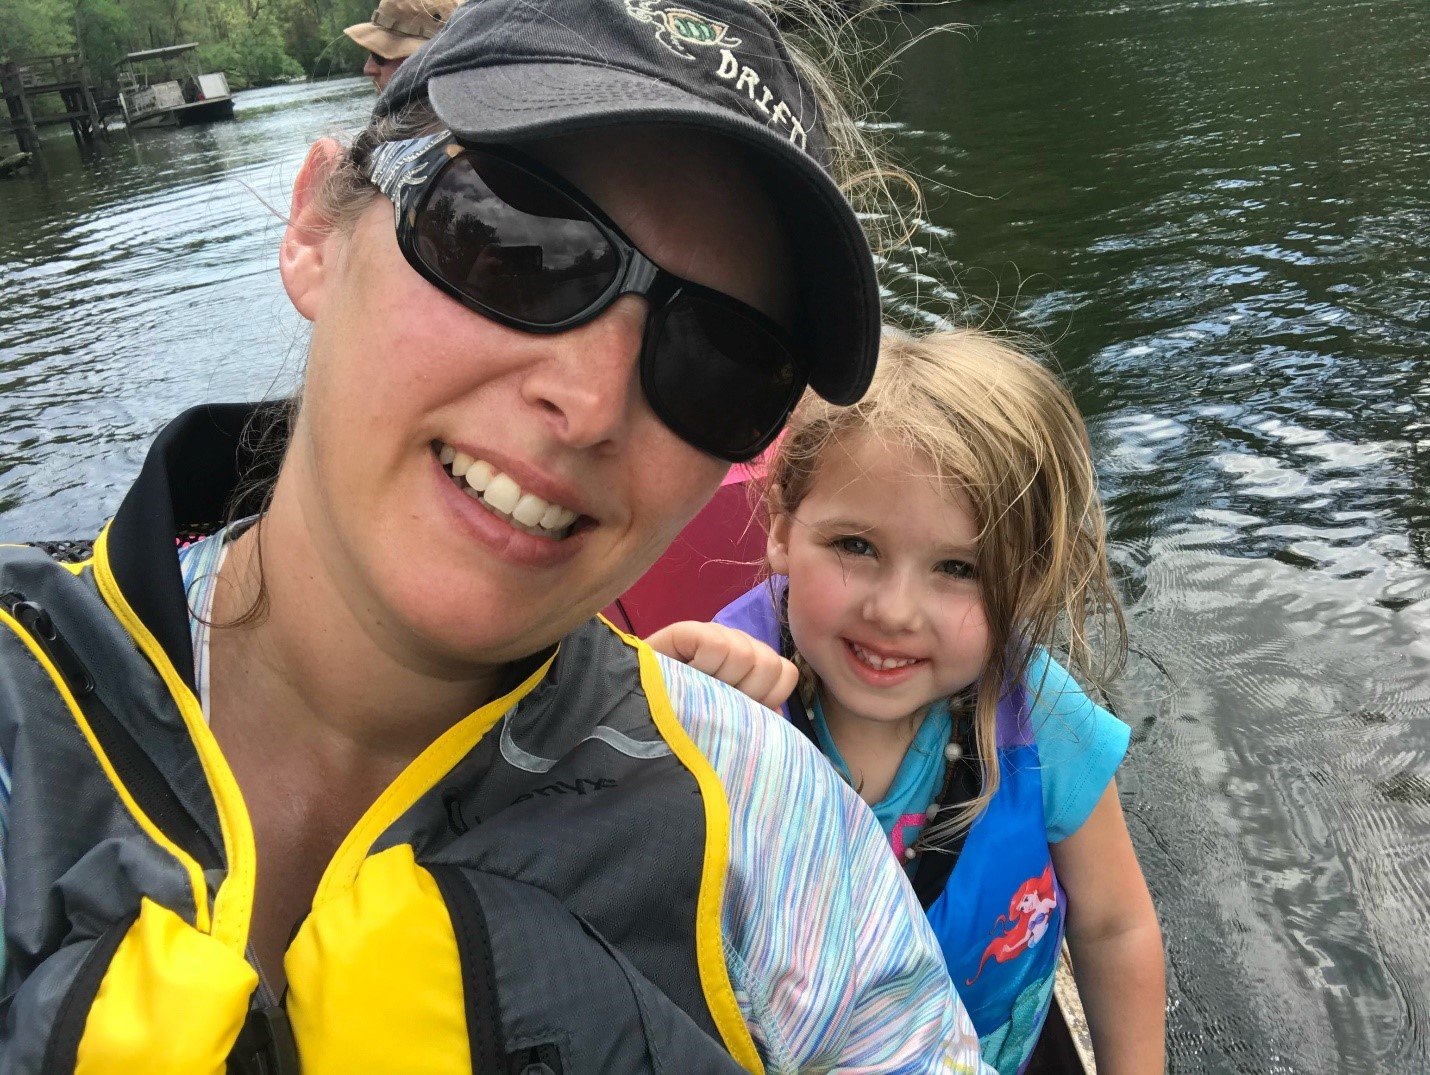 Amanda Nalley and her daughter sport lifejackets to ensure the 5-year-old’s safety.